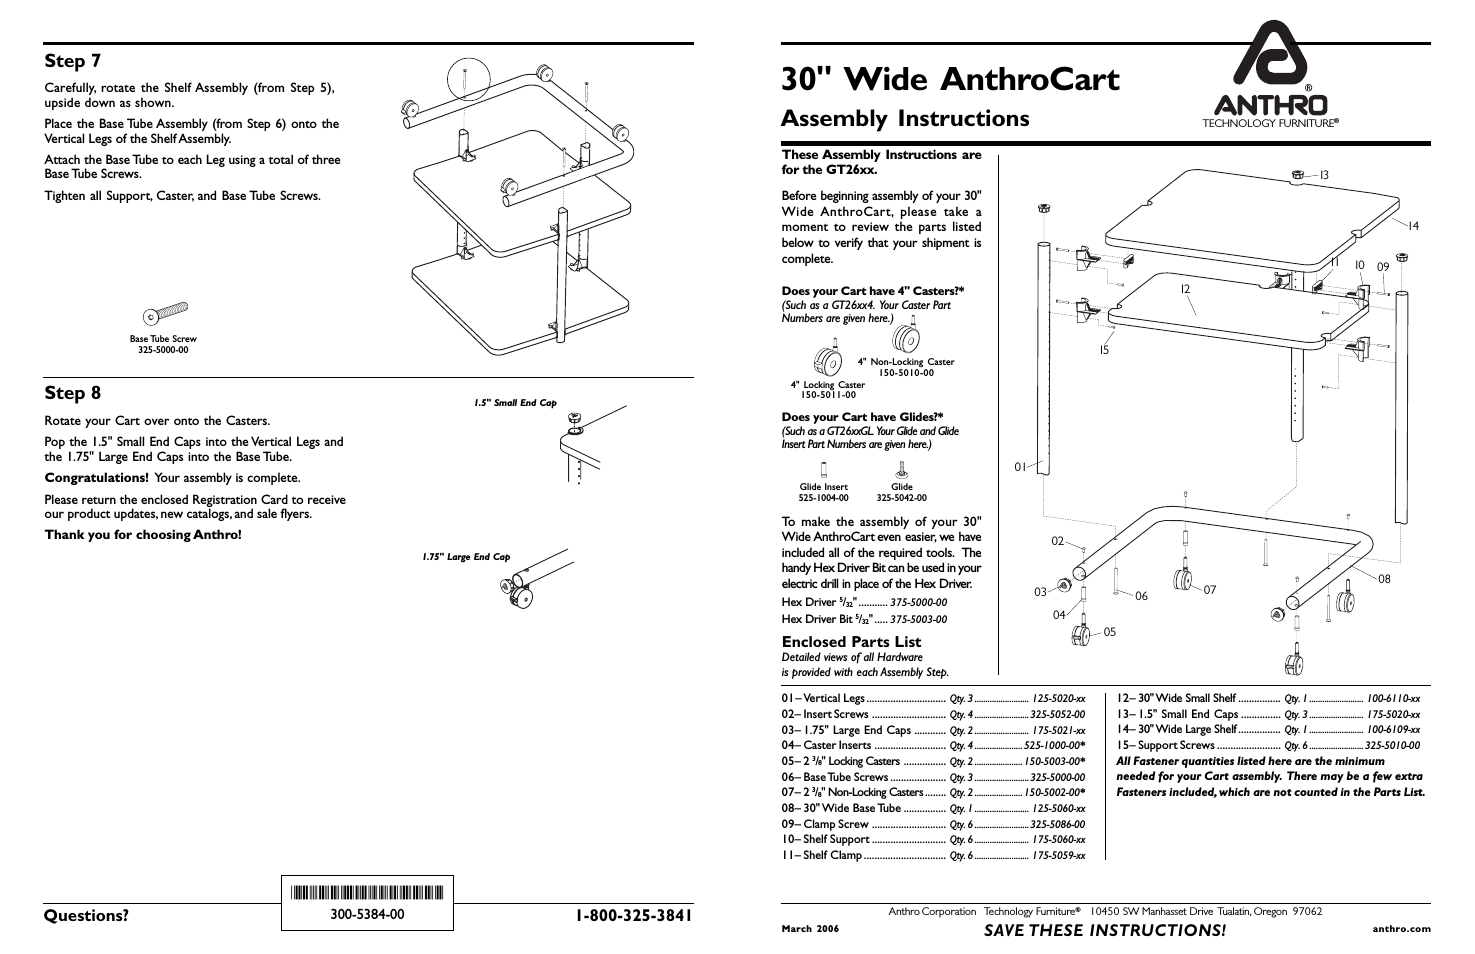 Small AnthroCarts 30W Assembly Instructions